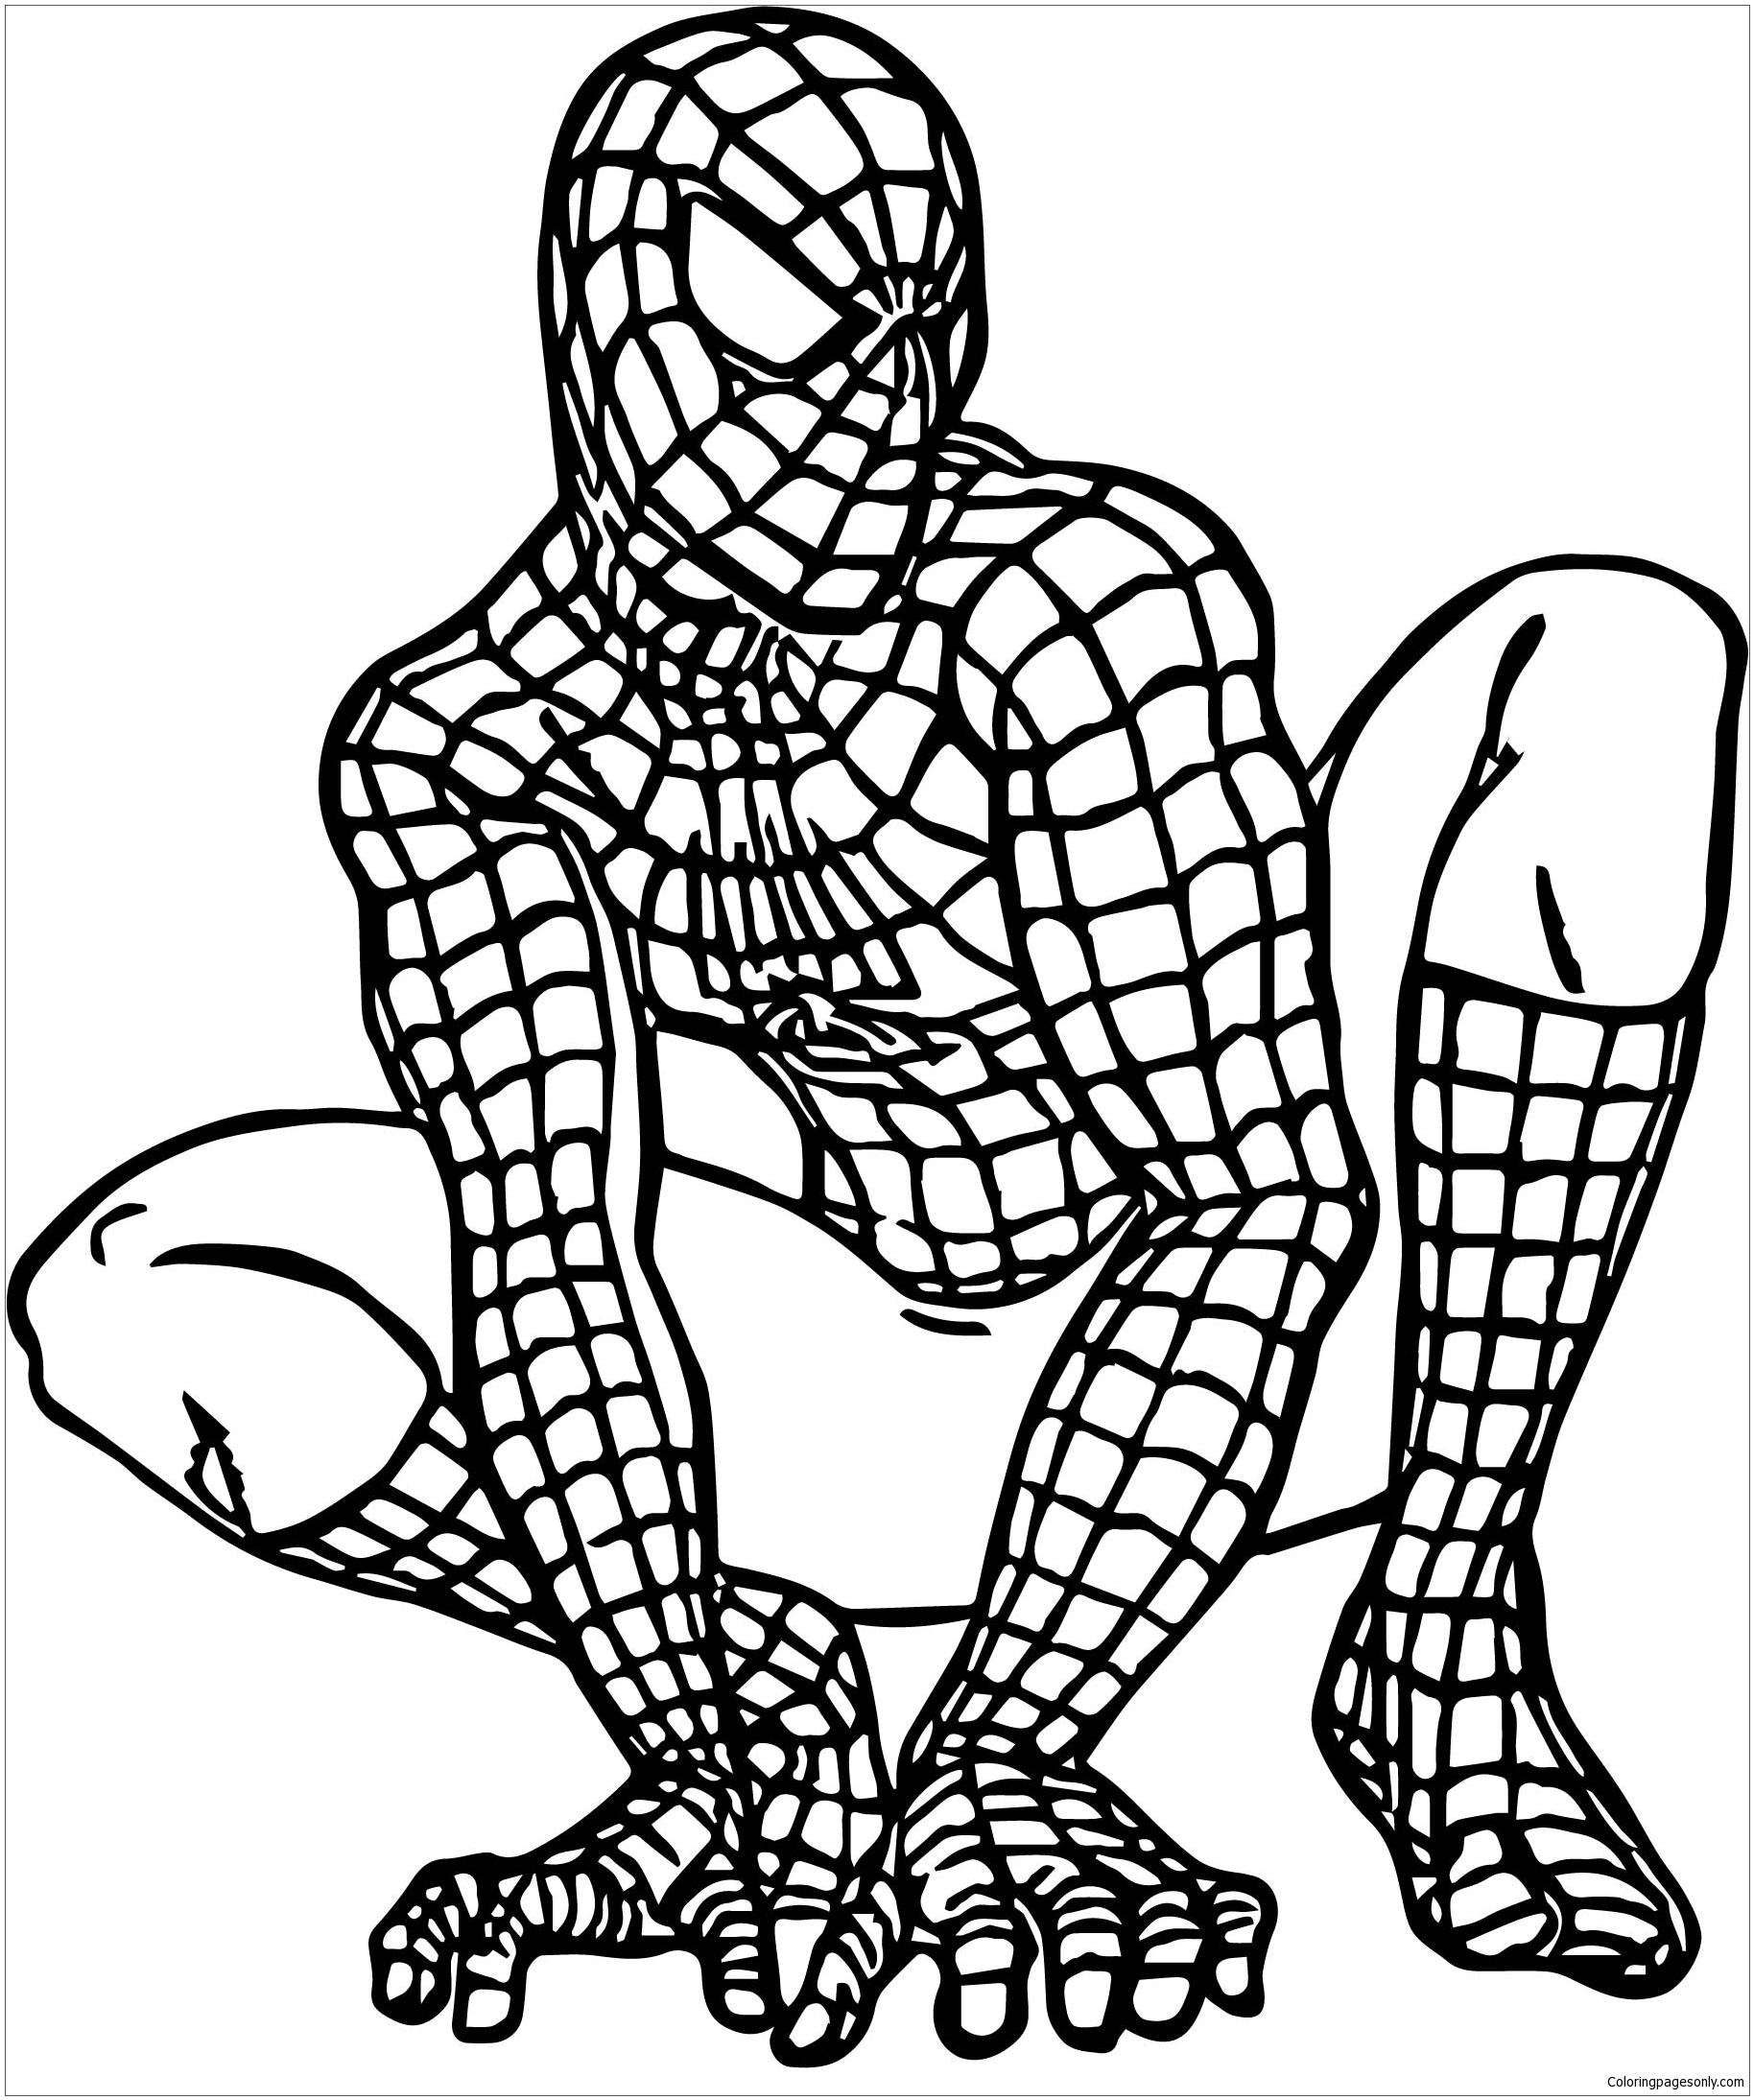 Free Printable Spiderman Color Pages